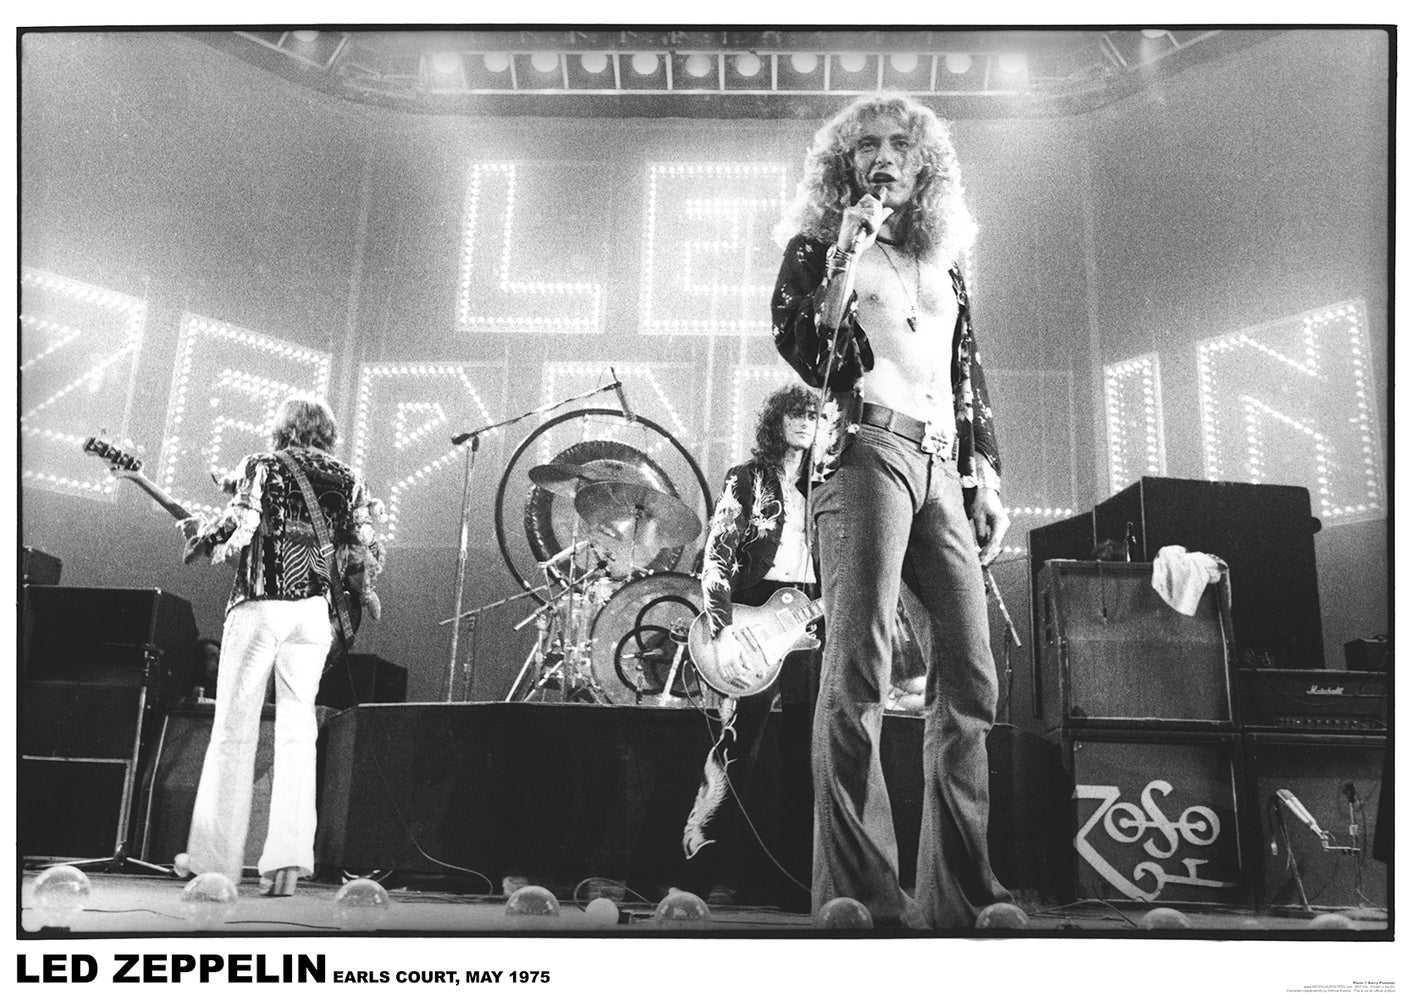 Led Zeppelin Earl's Court Live May 1975 Maxi Poster